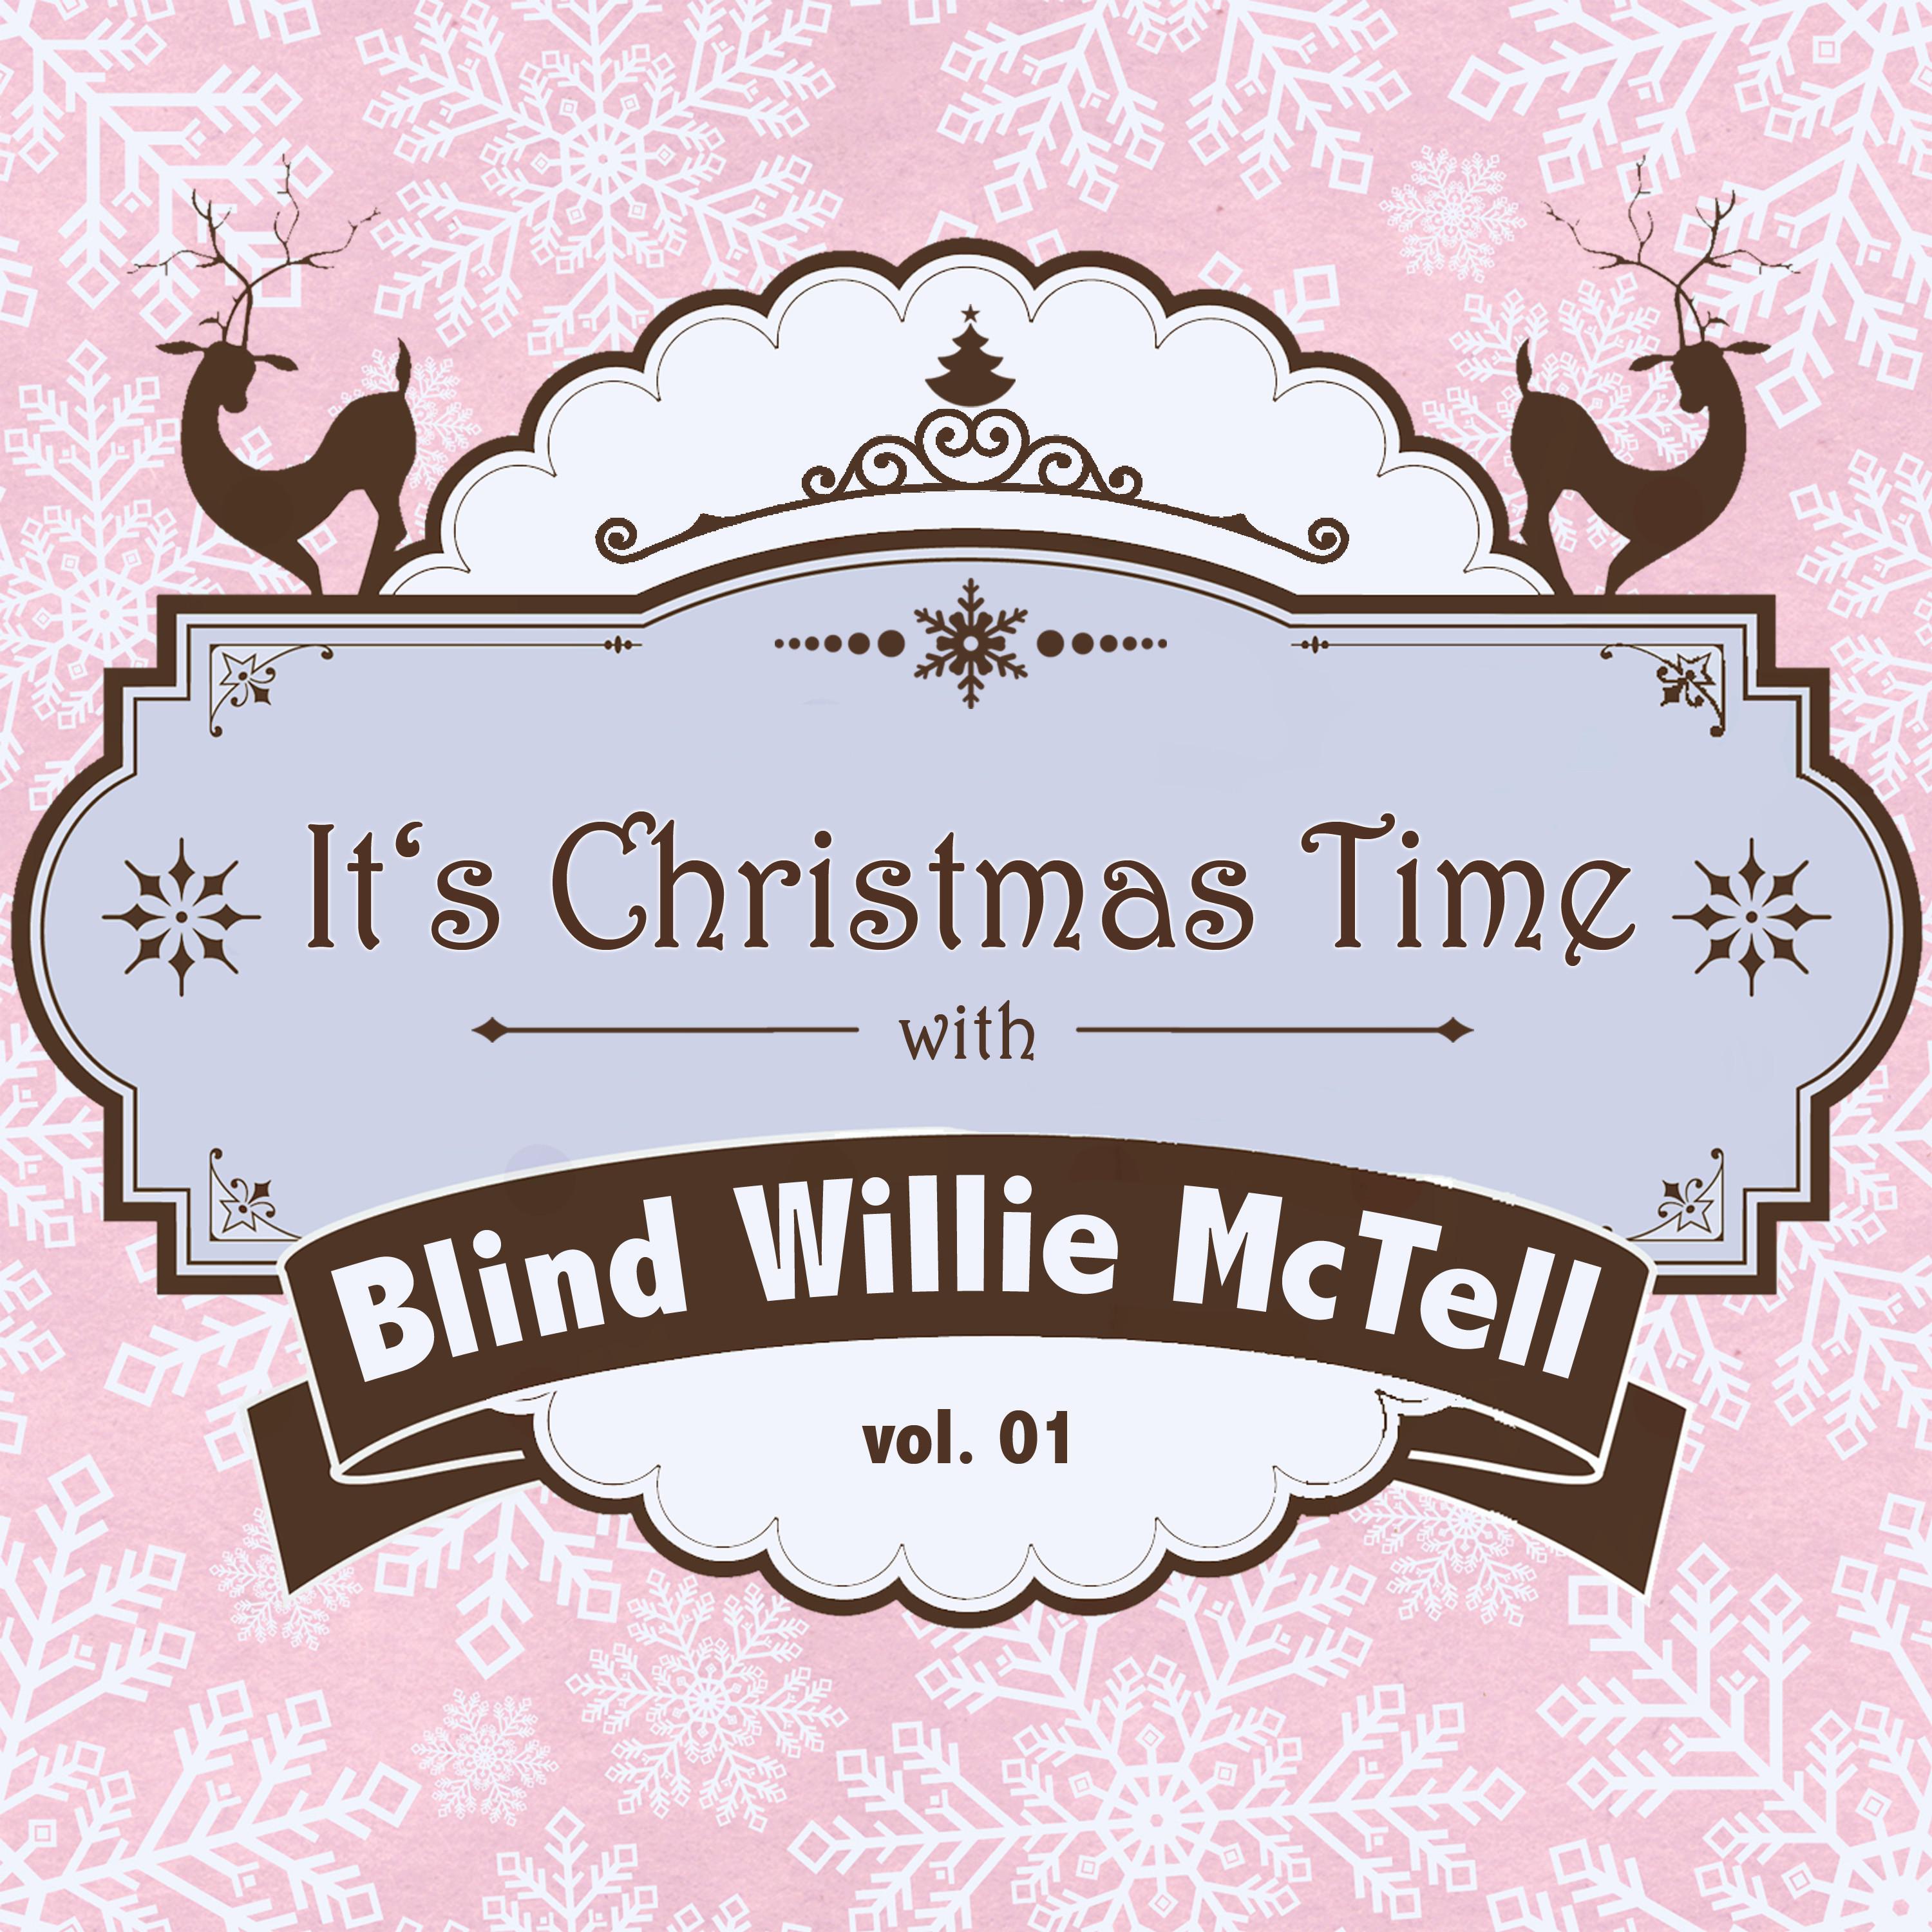 It's Christmas Time with Blind Willie Mctell, Vol. 01